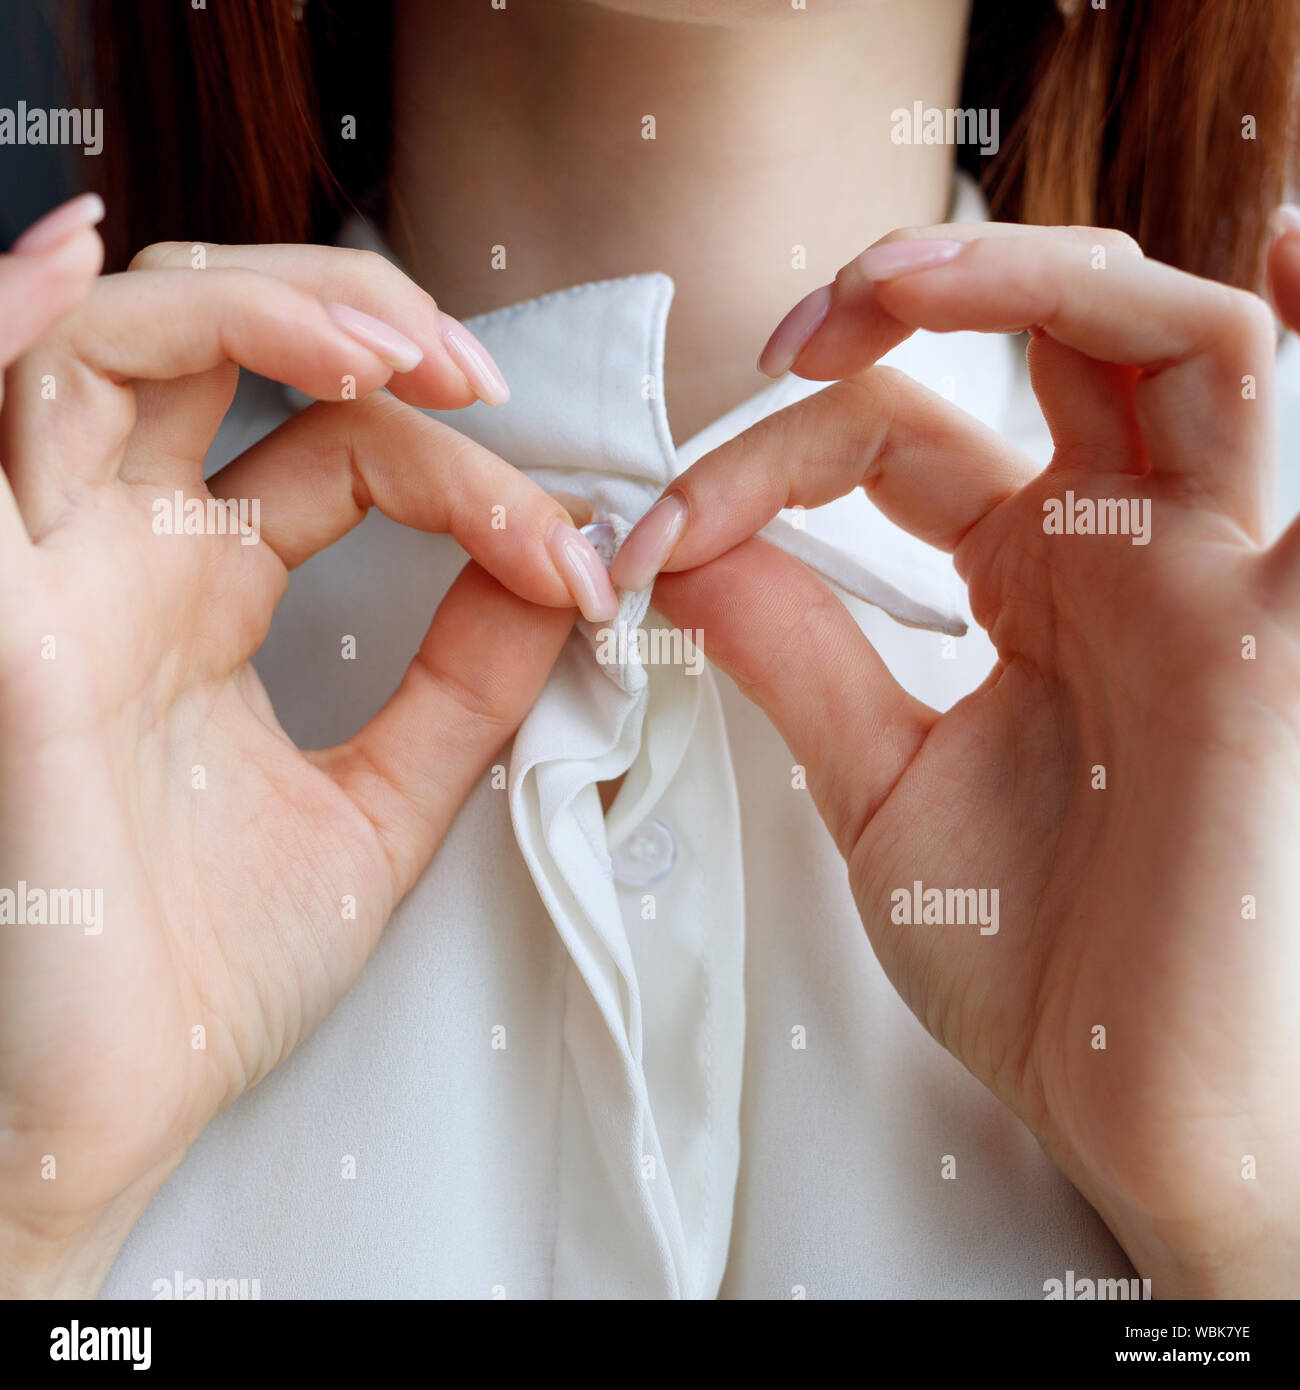 Unrecognizable redhead woman unbuttoning white blouse at home. Close-up view on hands. Stock Photo